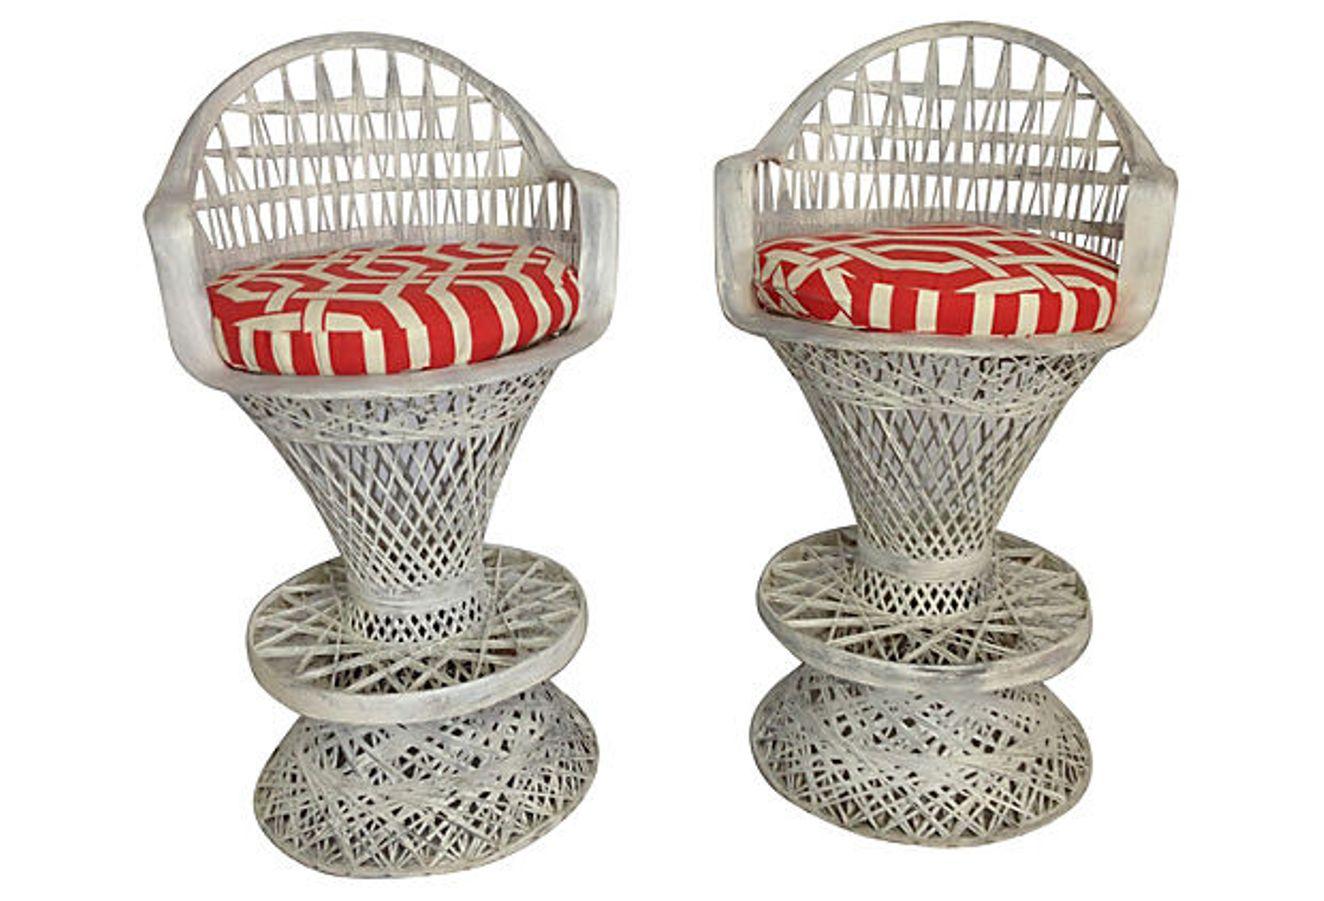 Mid-Century Pair Of American Russell Woodard designed spun fiberglass bar stools, painted in a grey wash white. Includes a pair of new indoor outdoor orange and white geometric fabric slip cover cushions. Fabric is machine wash with zippers for easy